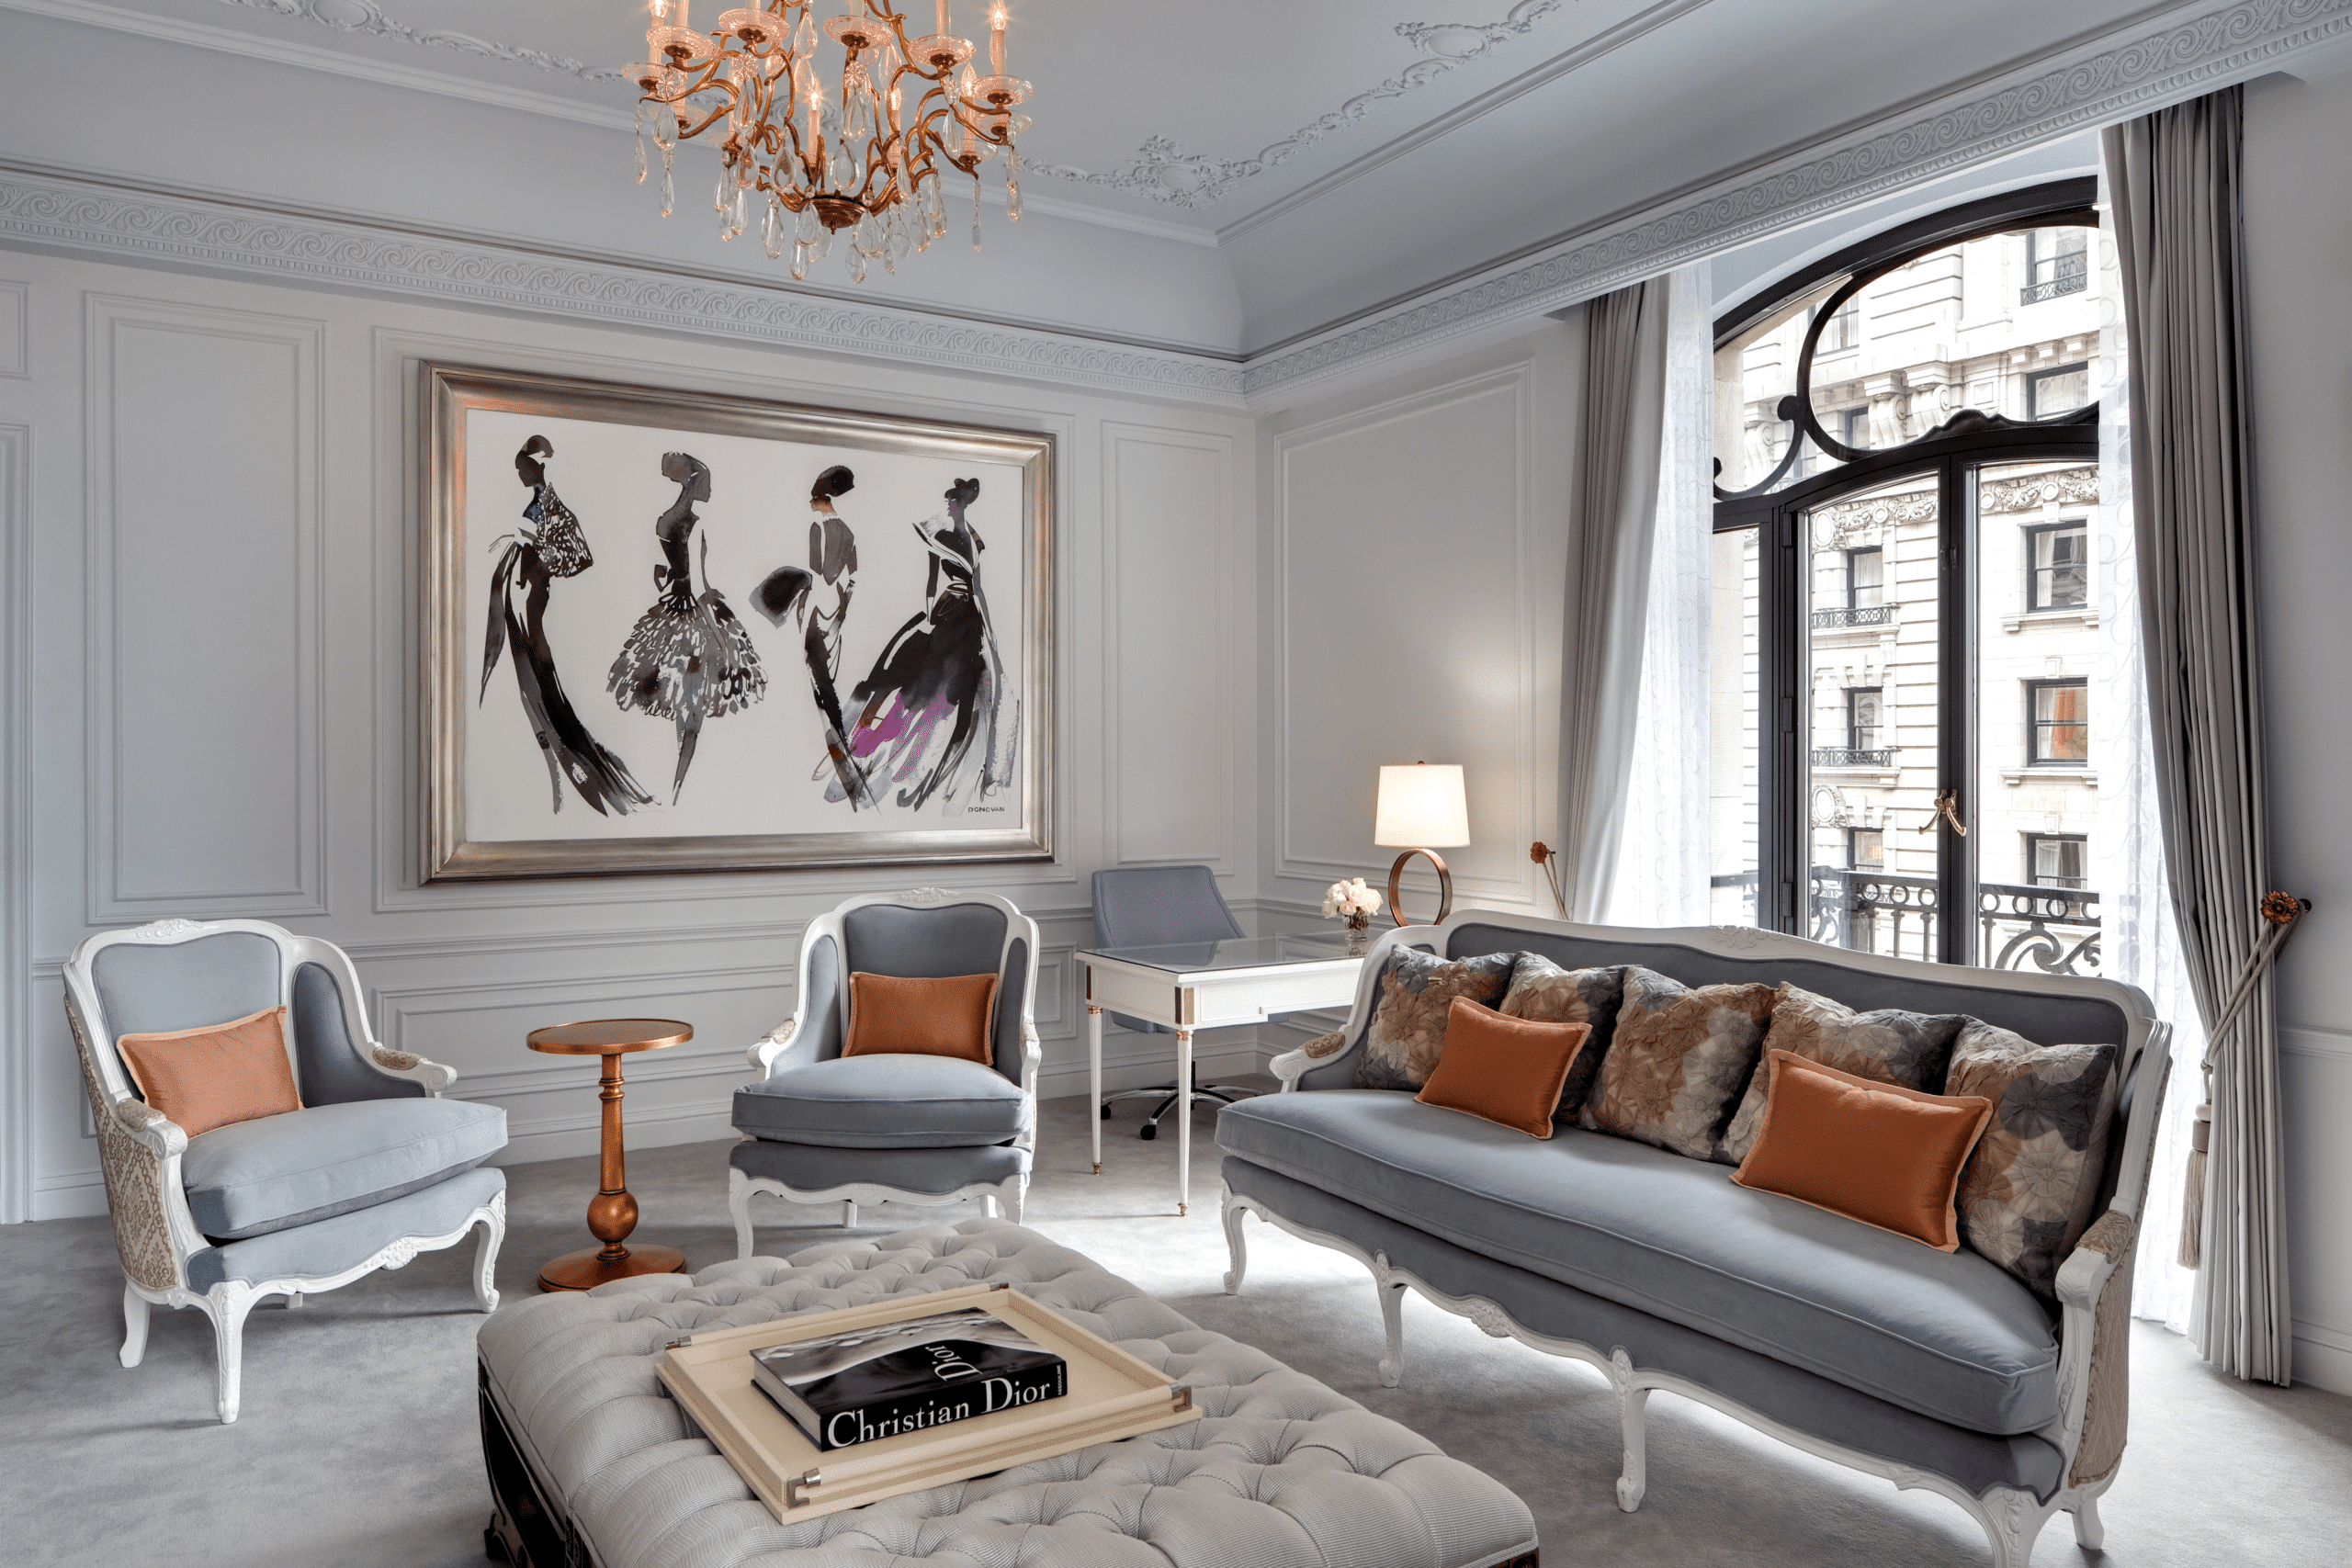 Hotels with Fashion Designer Connections